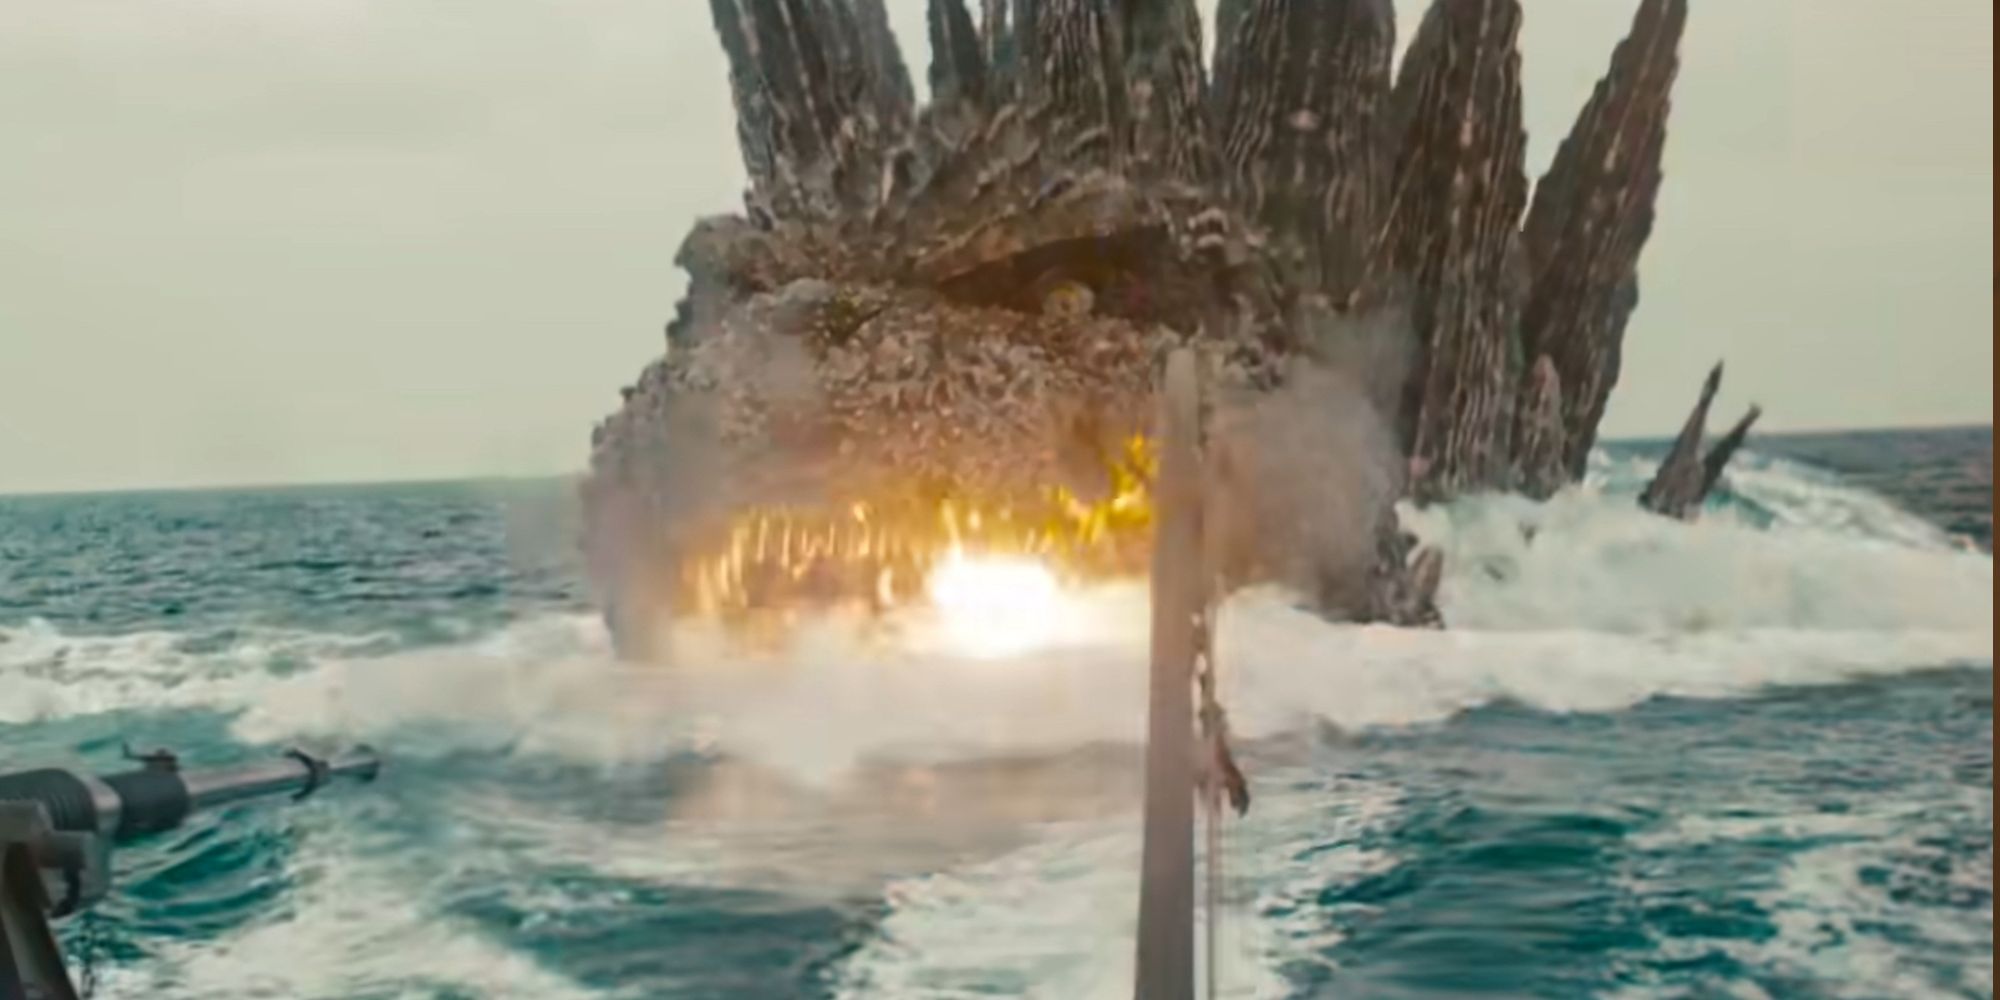 Godzilla charging forward in the water with a fireball in his mouth in Godzilla Minus One